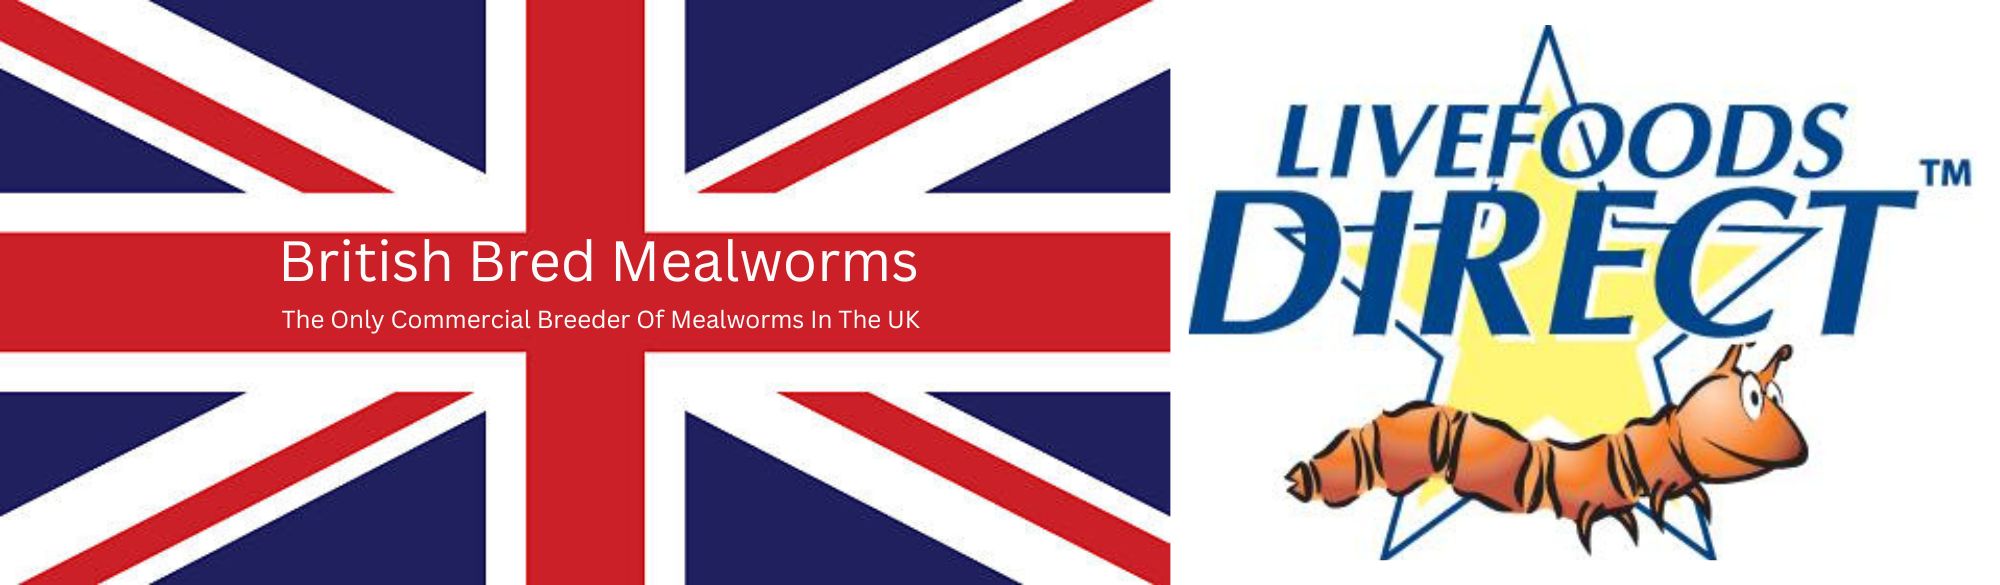 British Bred Mealworms